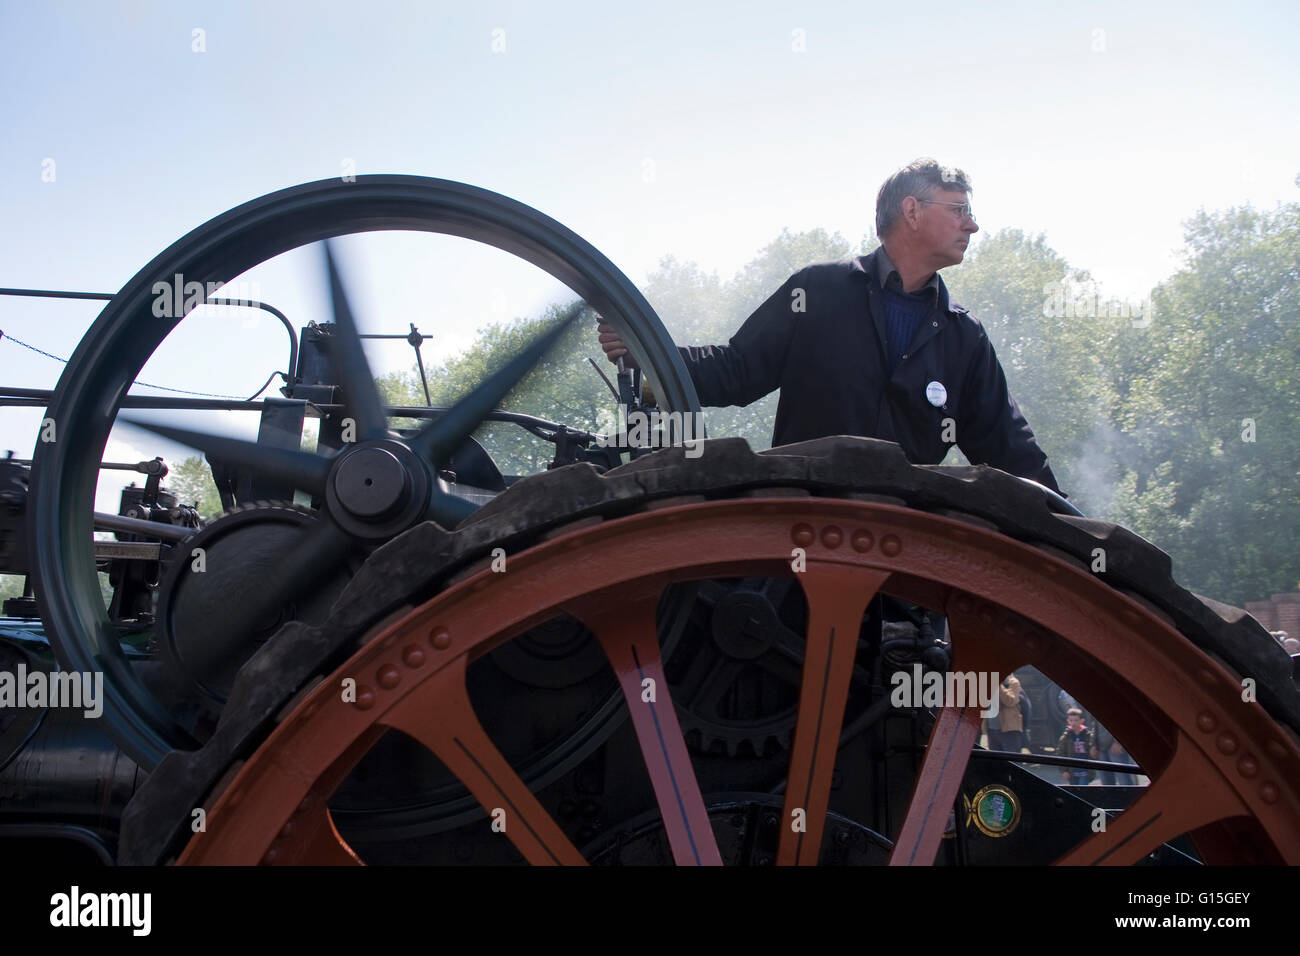 Europe, Germany, North Rhine-Westphalia, Ruhr area, Bochum, the largest festival in Germany for historical steam engines, steam  Stock Photo